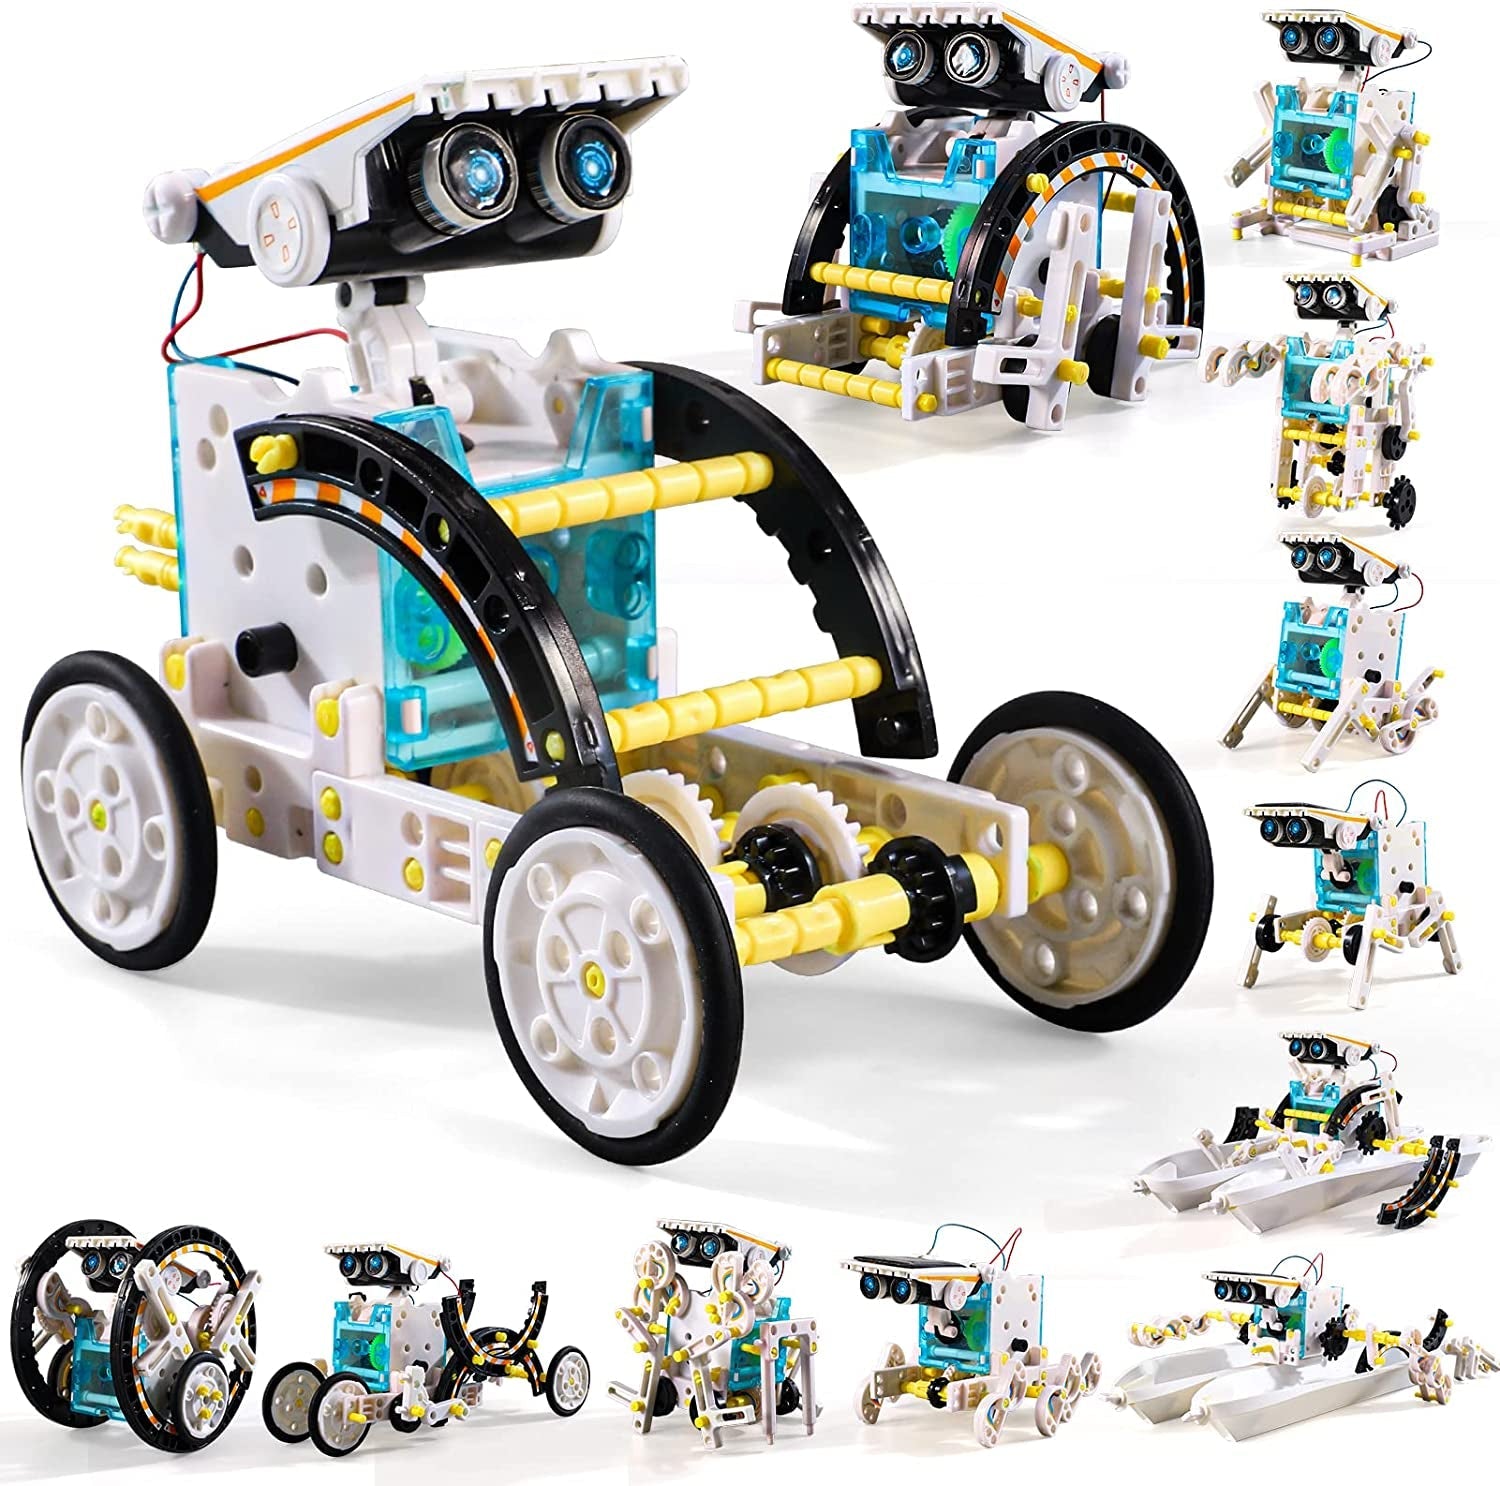 "Experience the Wonder of Lucky Doug 12-In-1 STEM Solar Robot Kit - The Perfect Gift for Curious Kids 8-13 Years Old! Inspire Learning and Creativity with this Educational Building Science Experiment Set - Ideal for Birthdays and Holidays!"